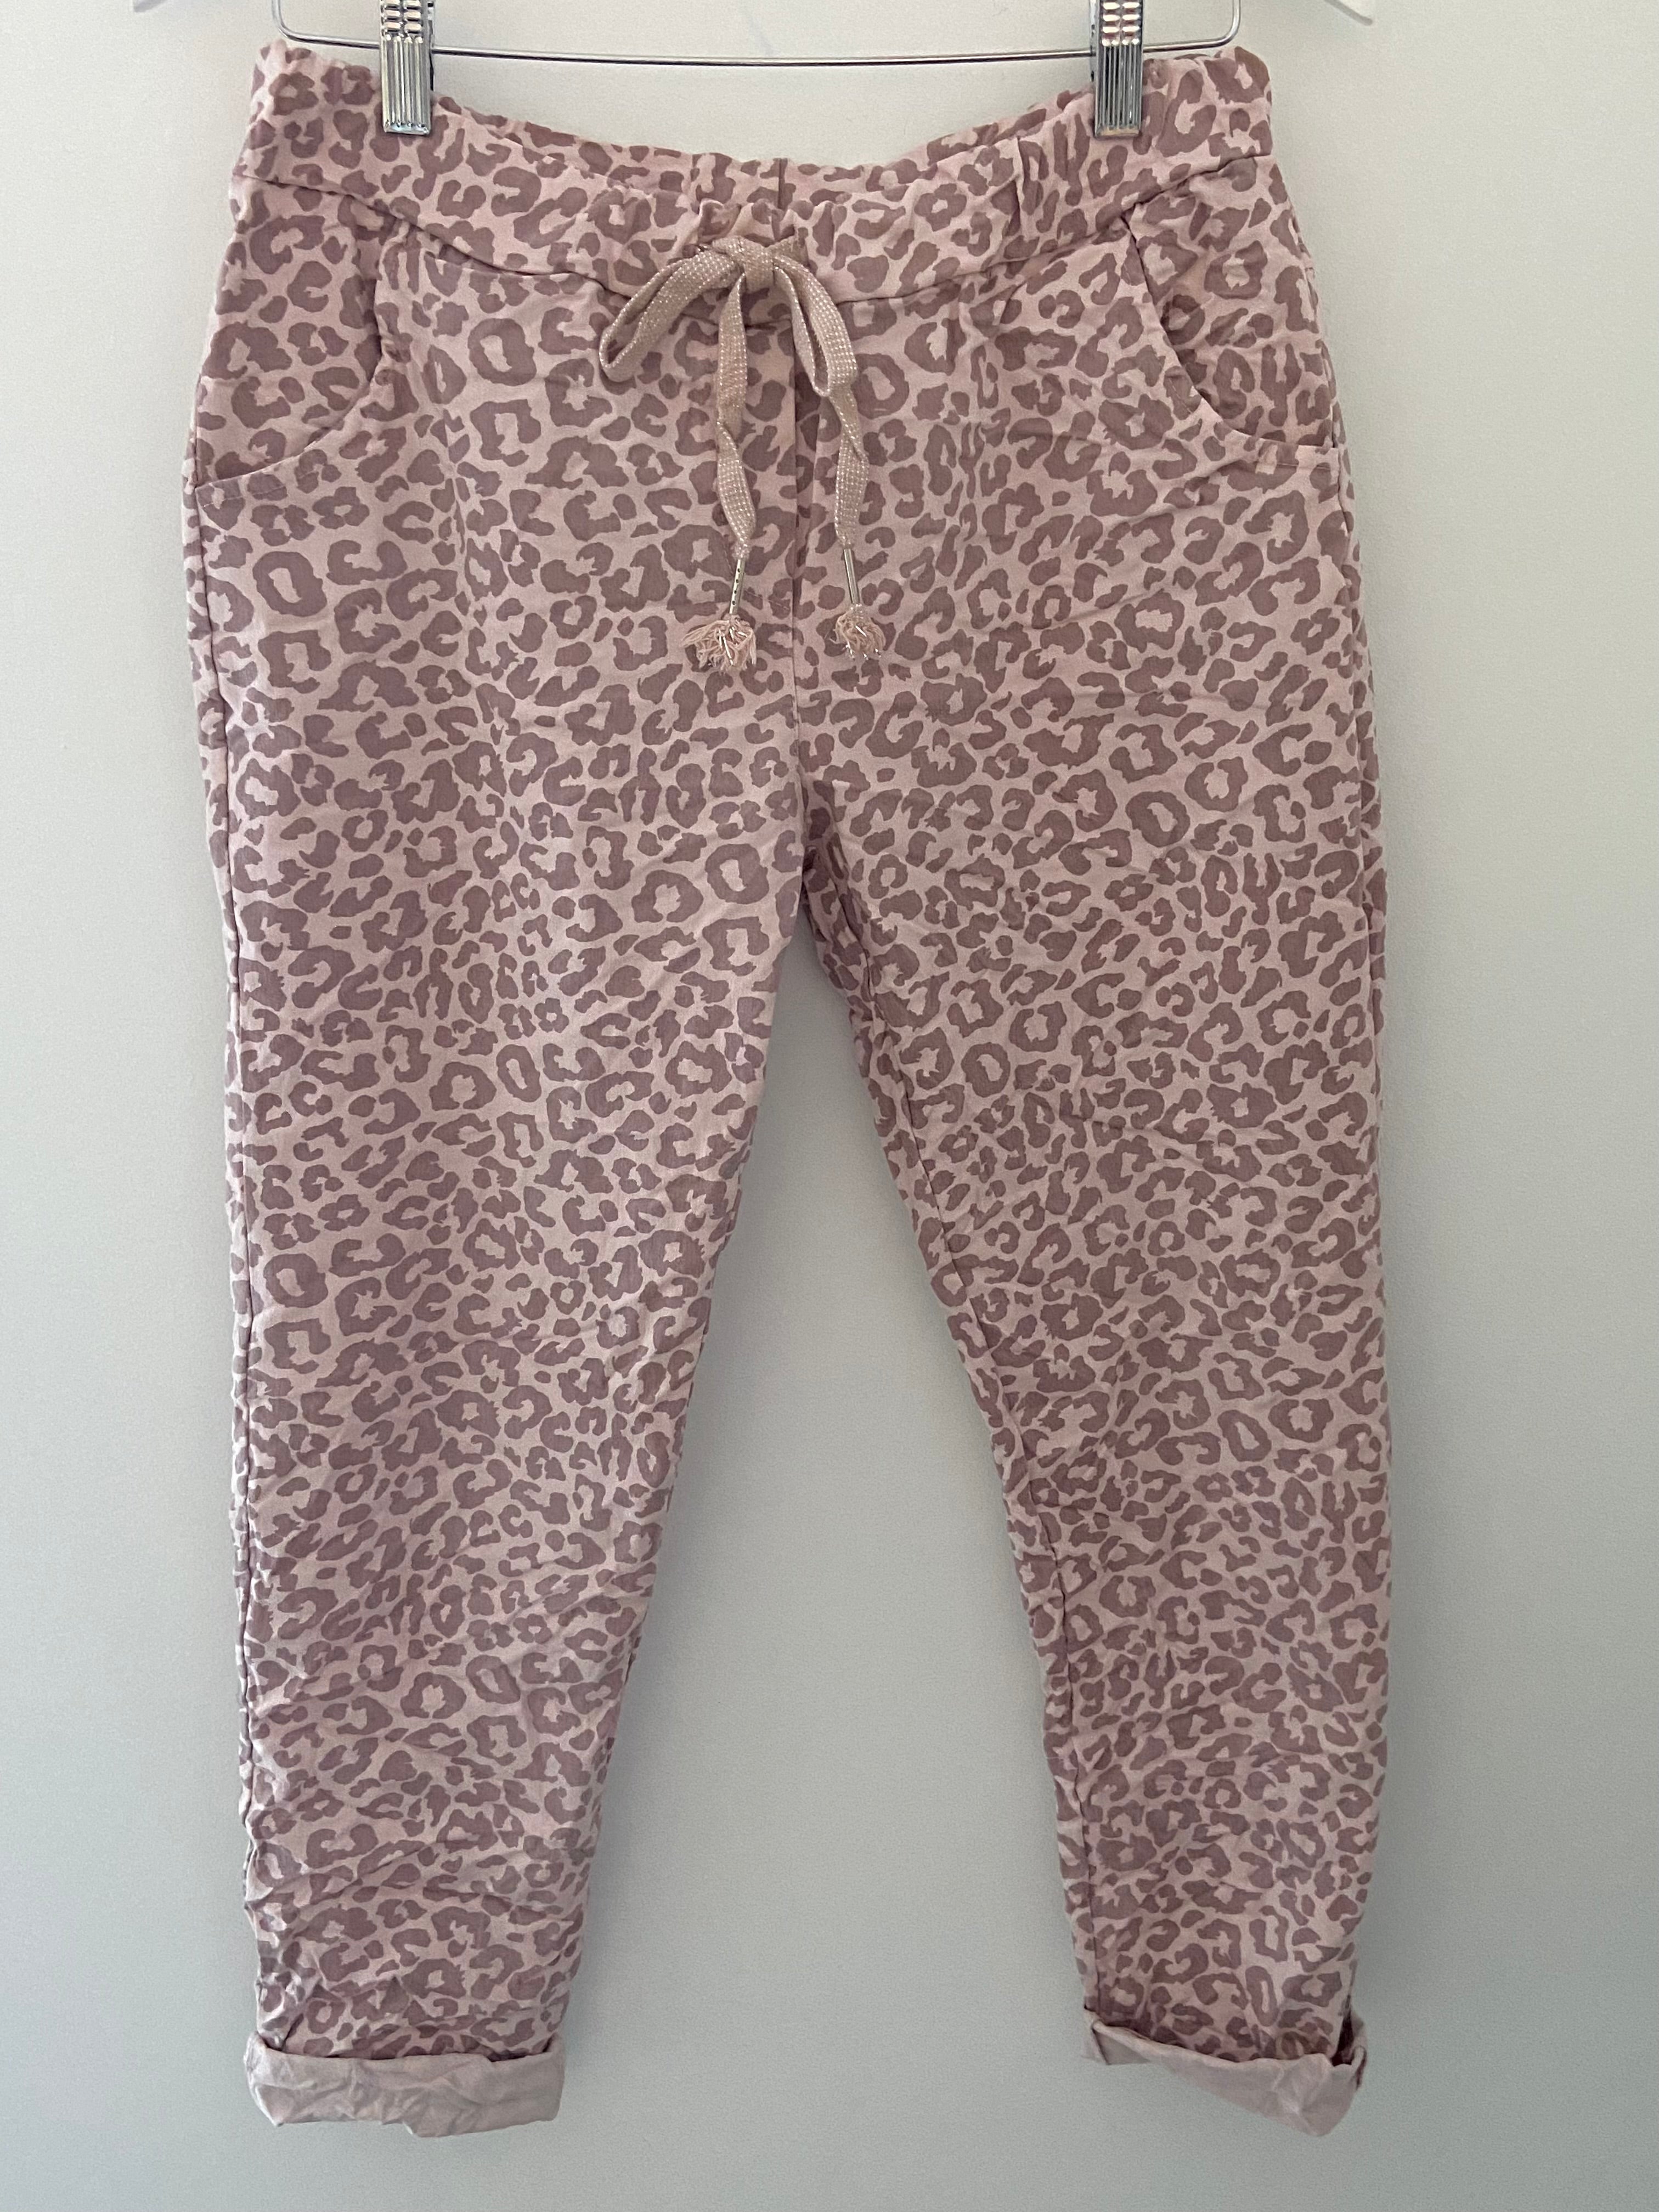 Slimfit Cotton Stretch Joggers in Pink Leopard